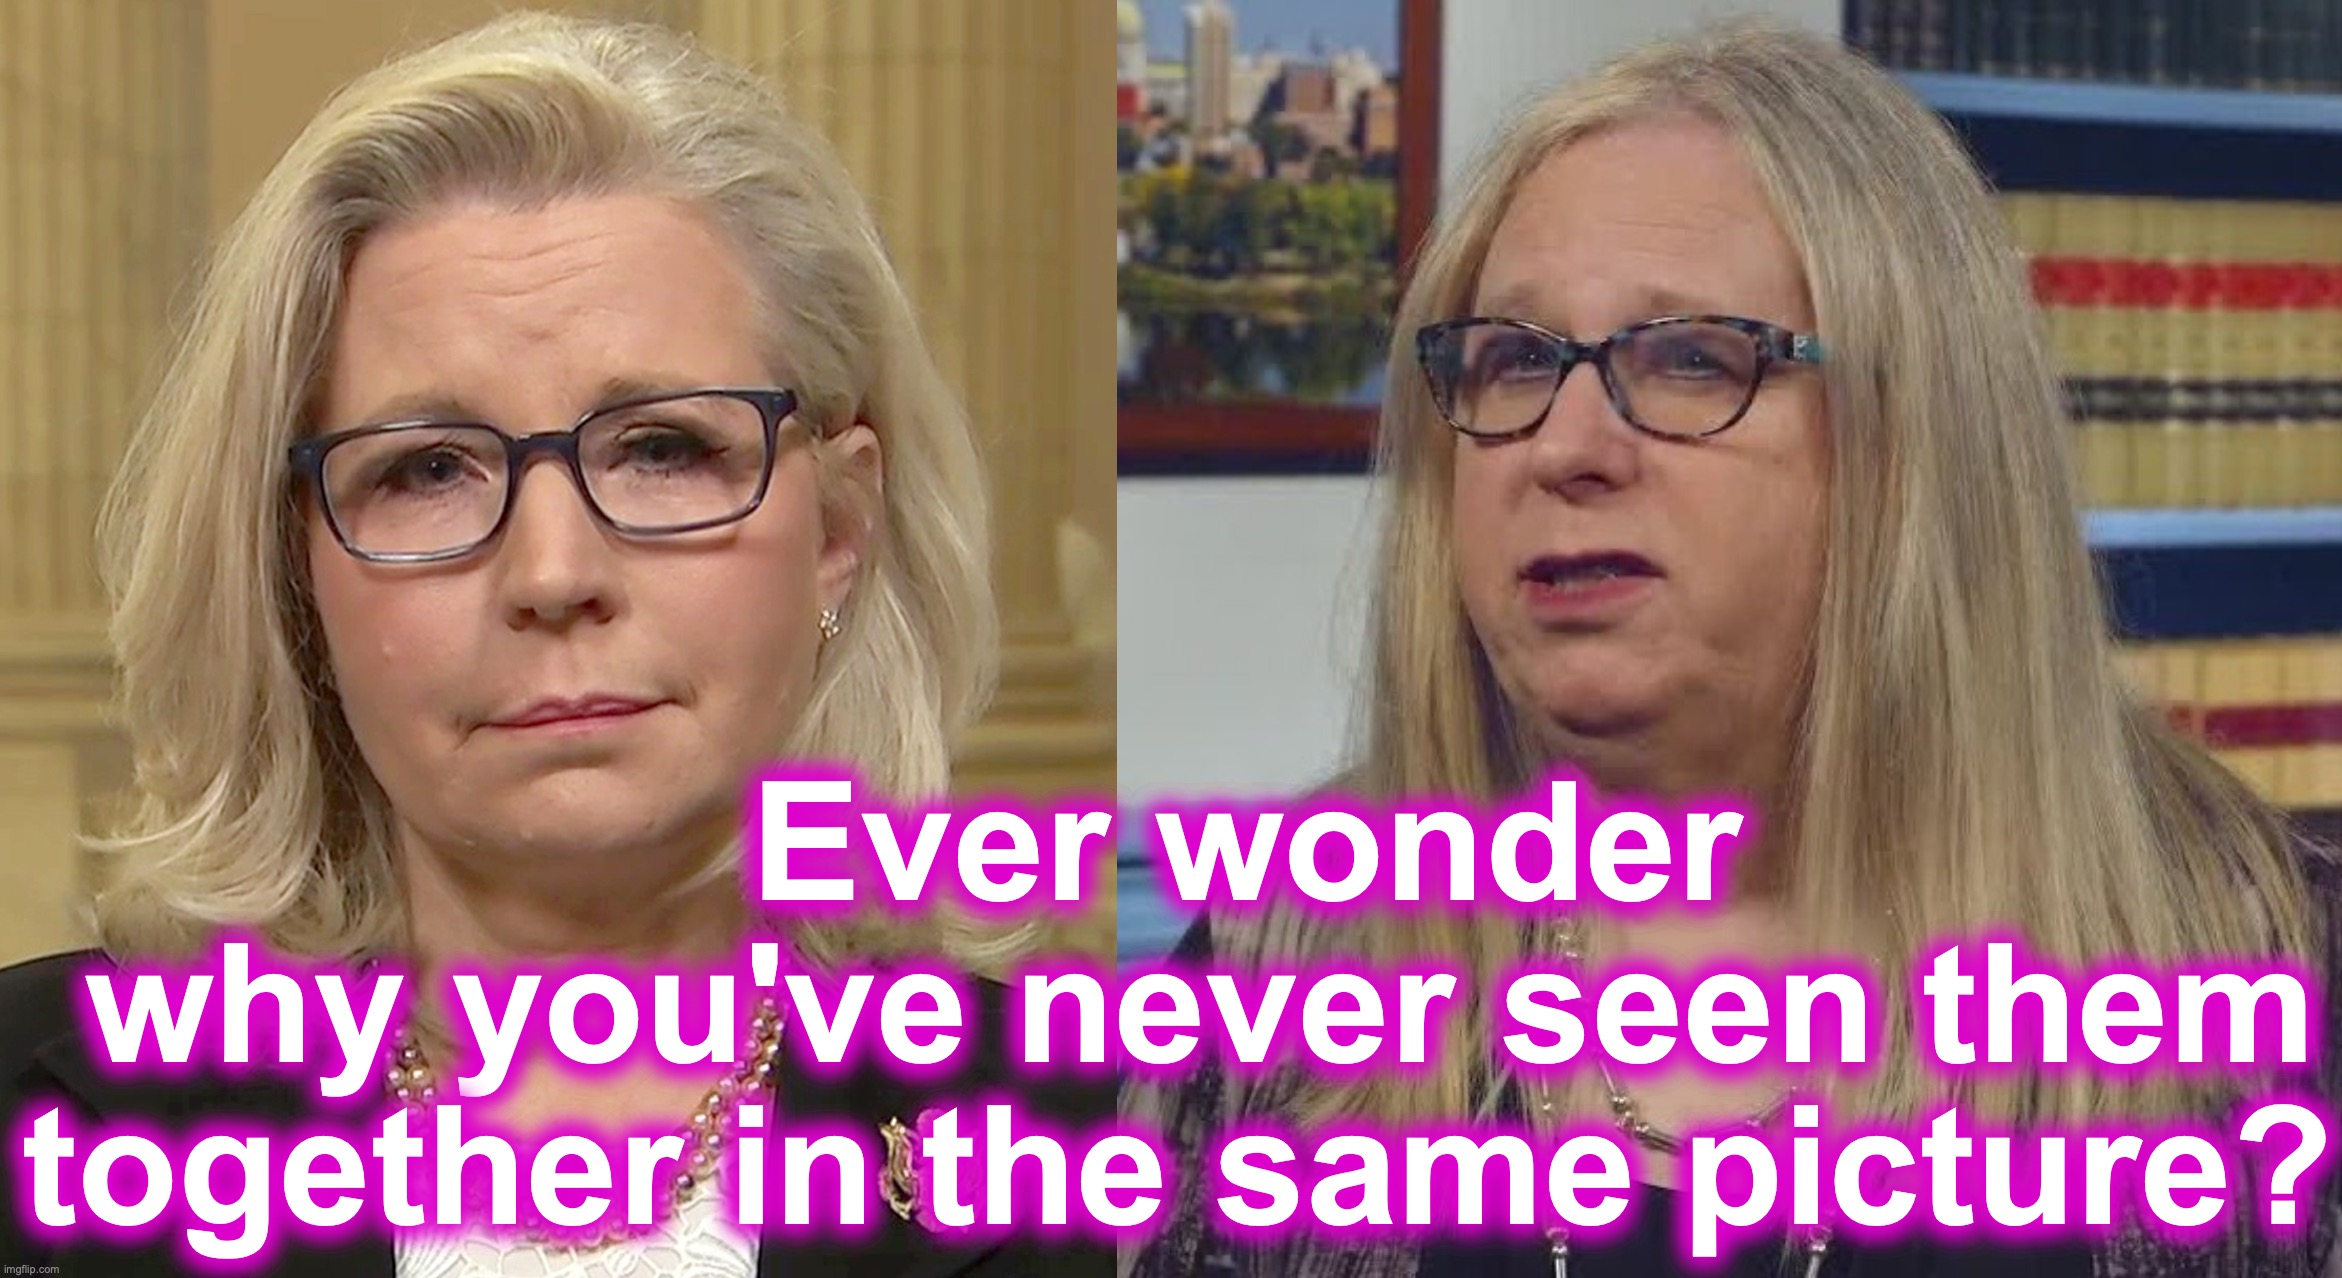 Ever wonder why you've never seen Rachel Levine and Liz Cheney together in the same picture? | Ever wonder
 why you've never seen them together in the same picture? | image tagged in doppelgnger,double,twins | made w/ Imgflip meme maker